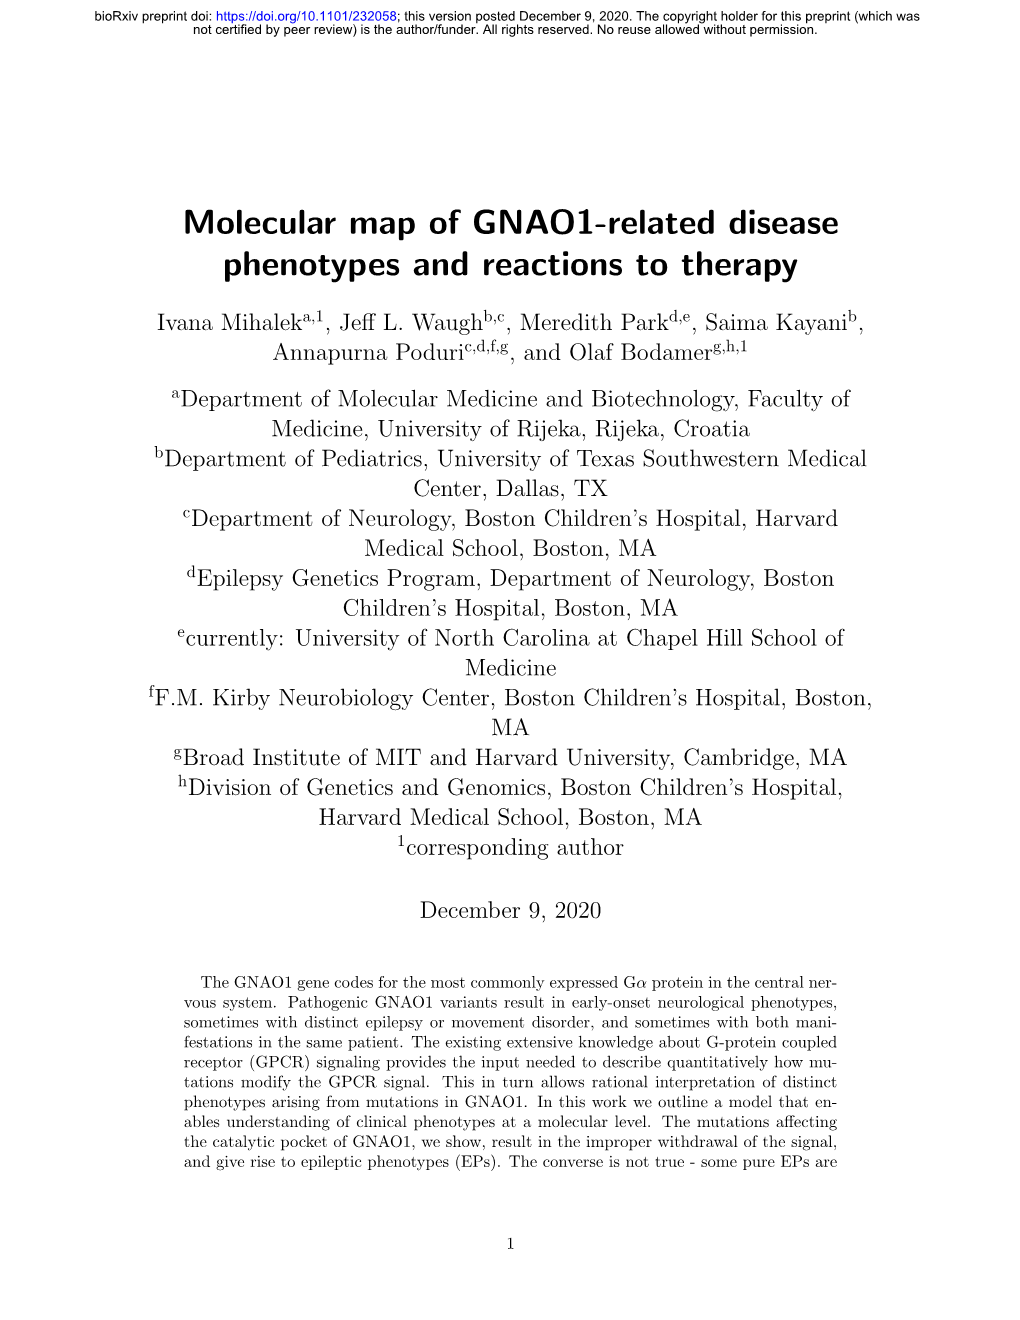 Molecular Map of GNAO1-Related Disease Phenotypes and Reactions to Therapy